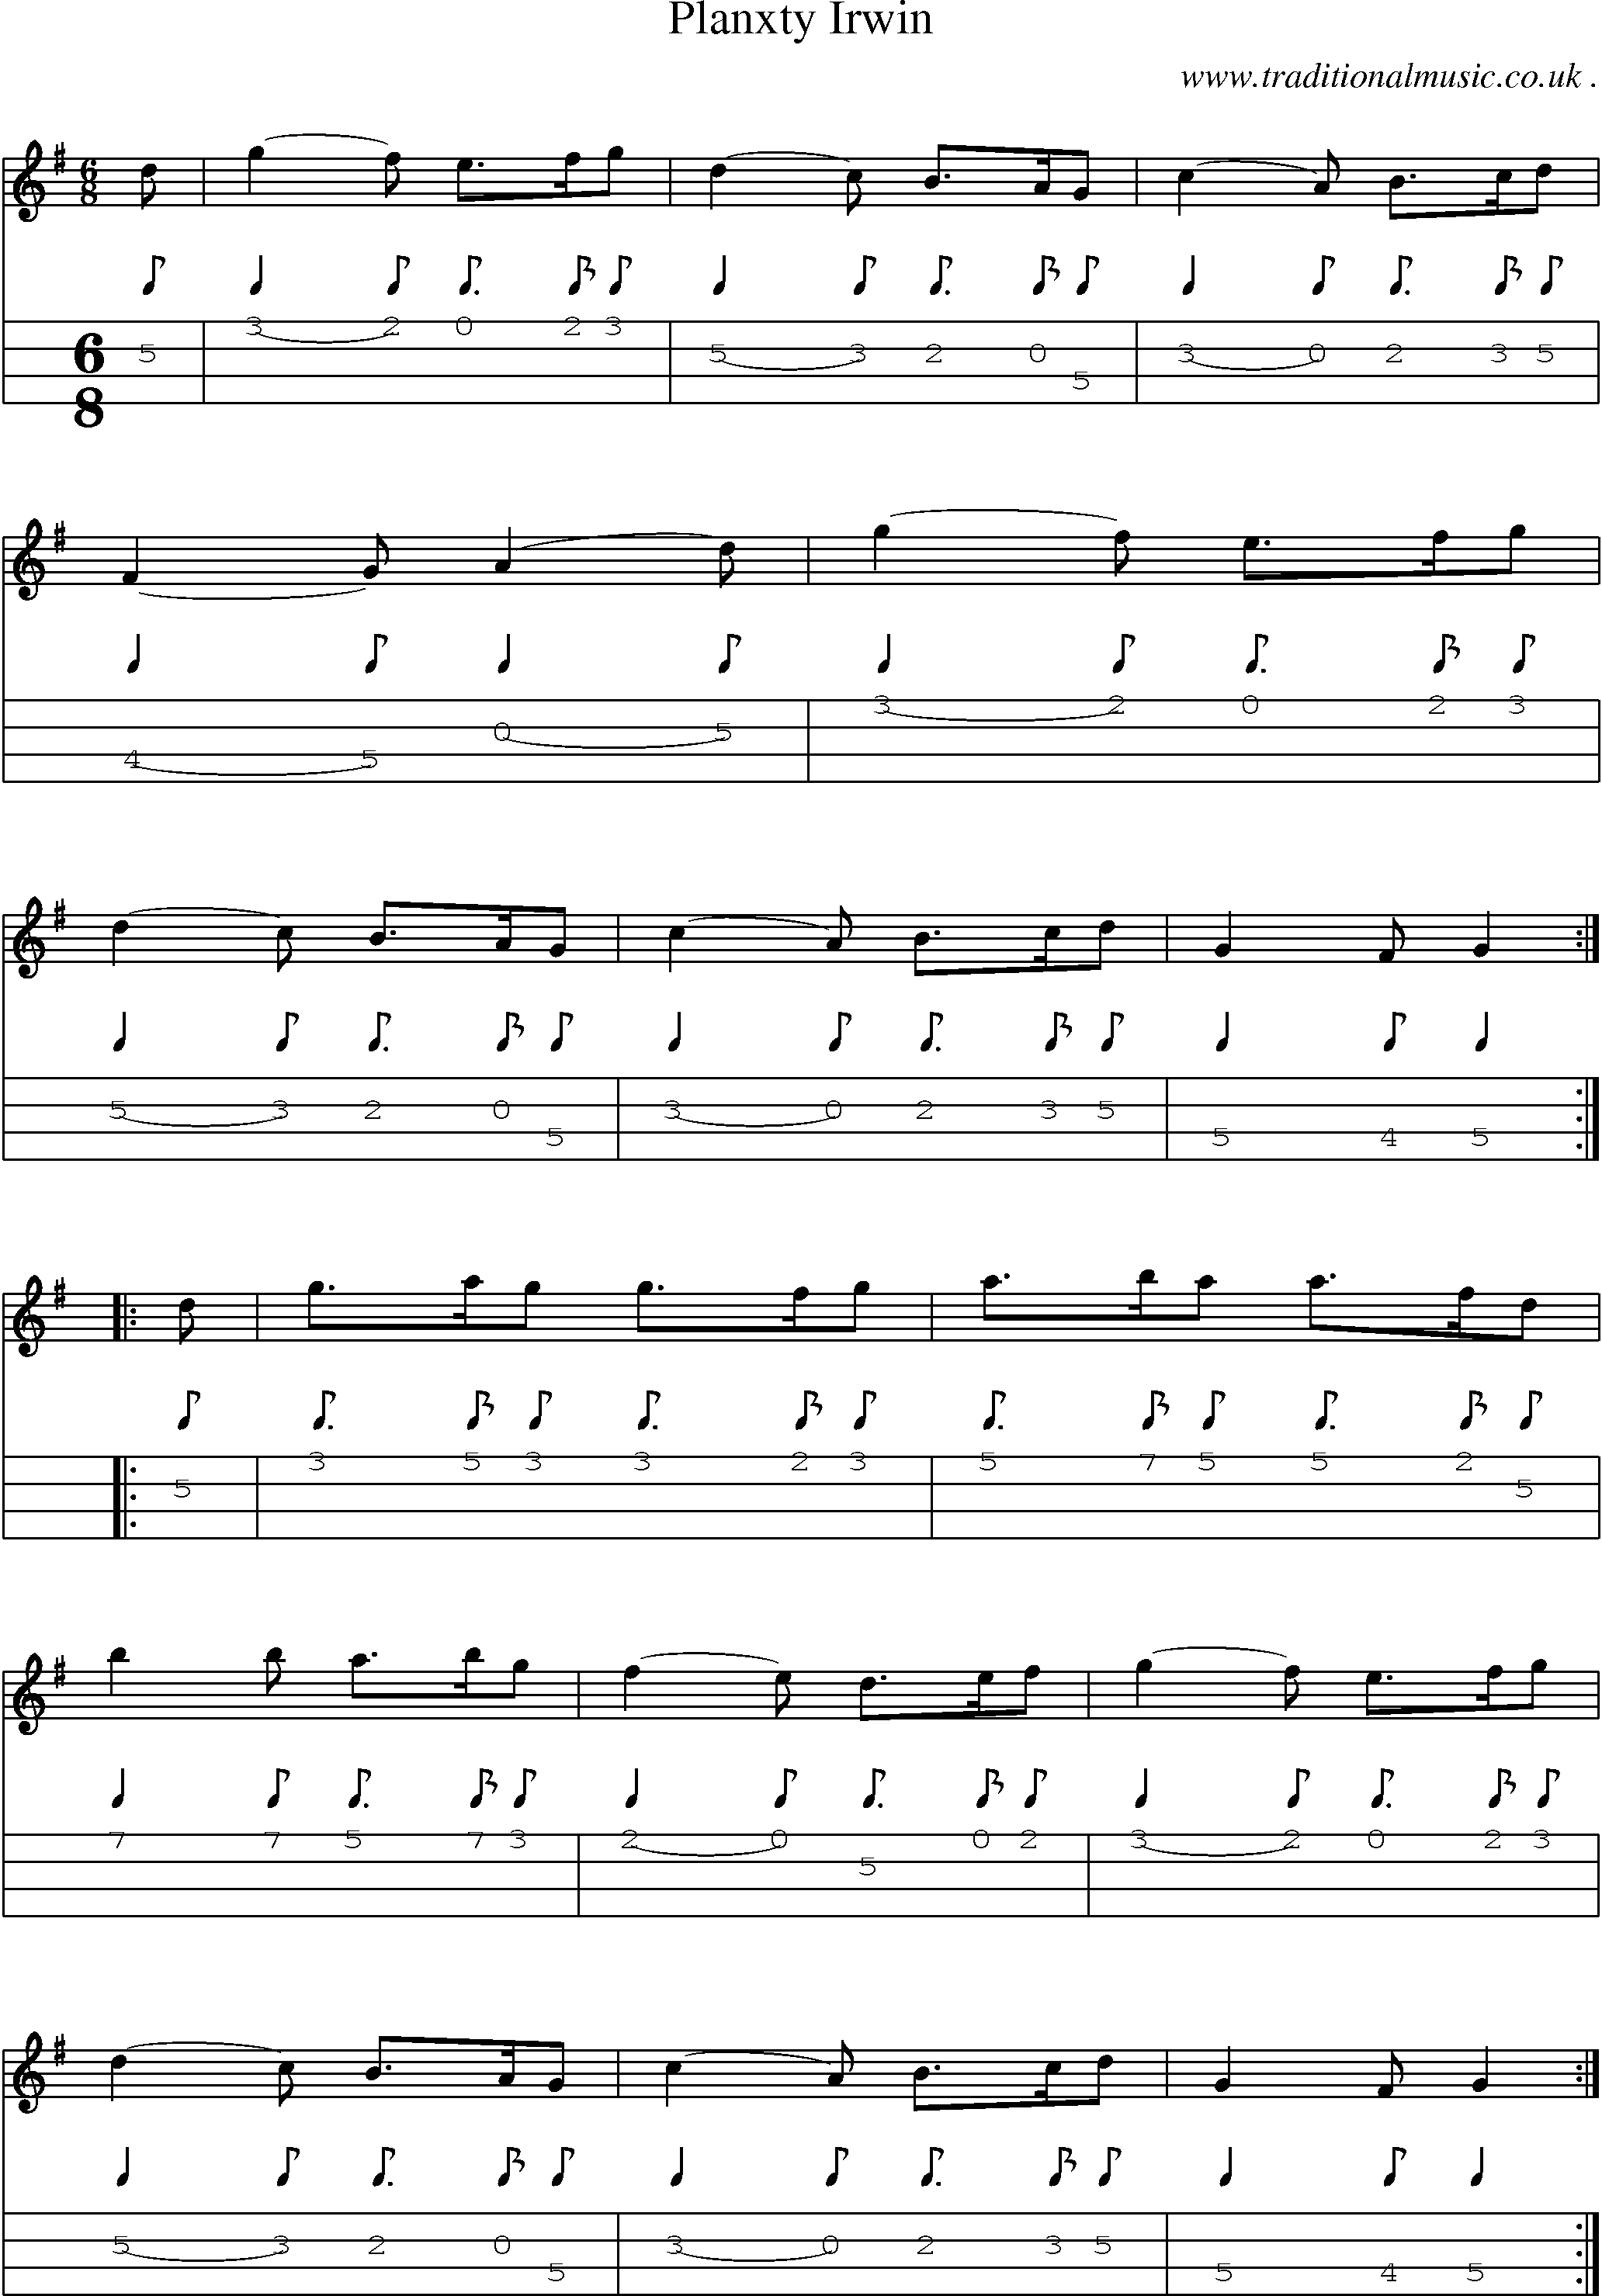 Sheet-Music and Mandolin Tabs for Planxty Irwin